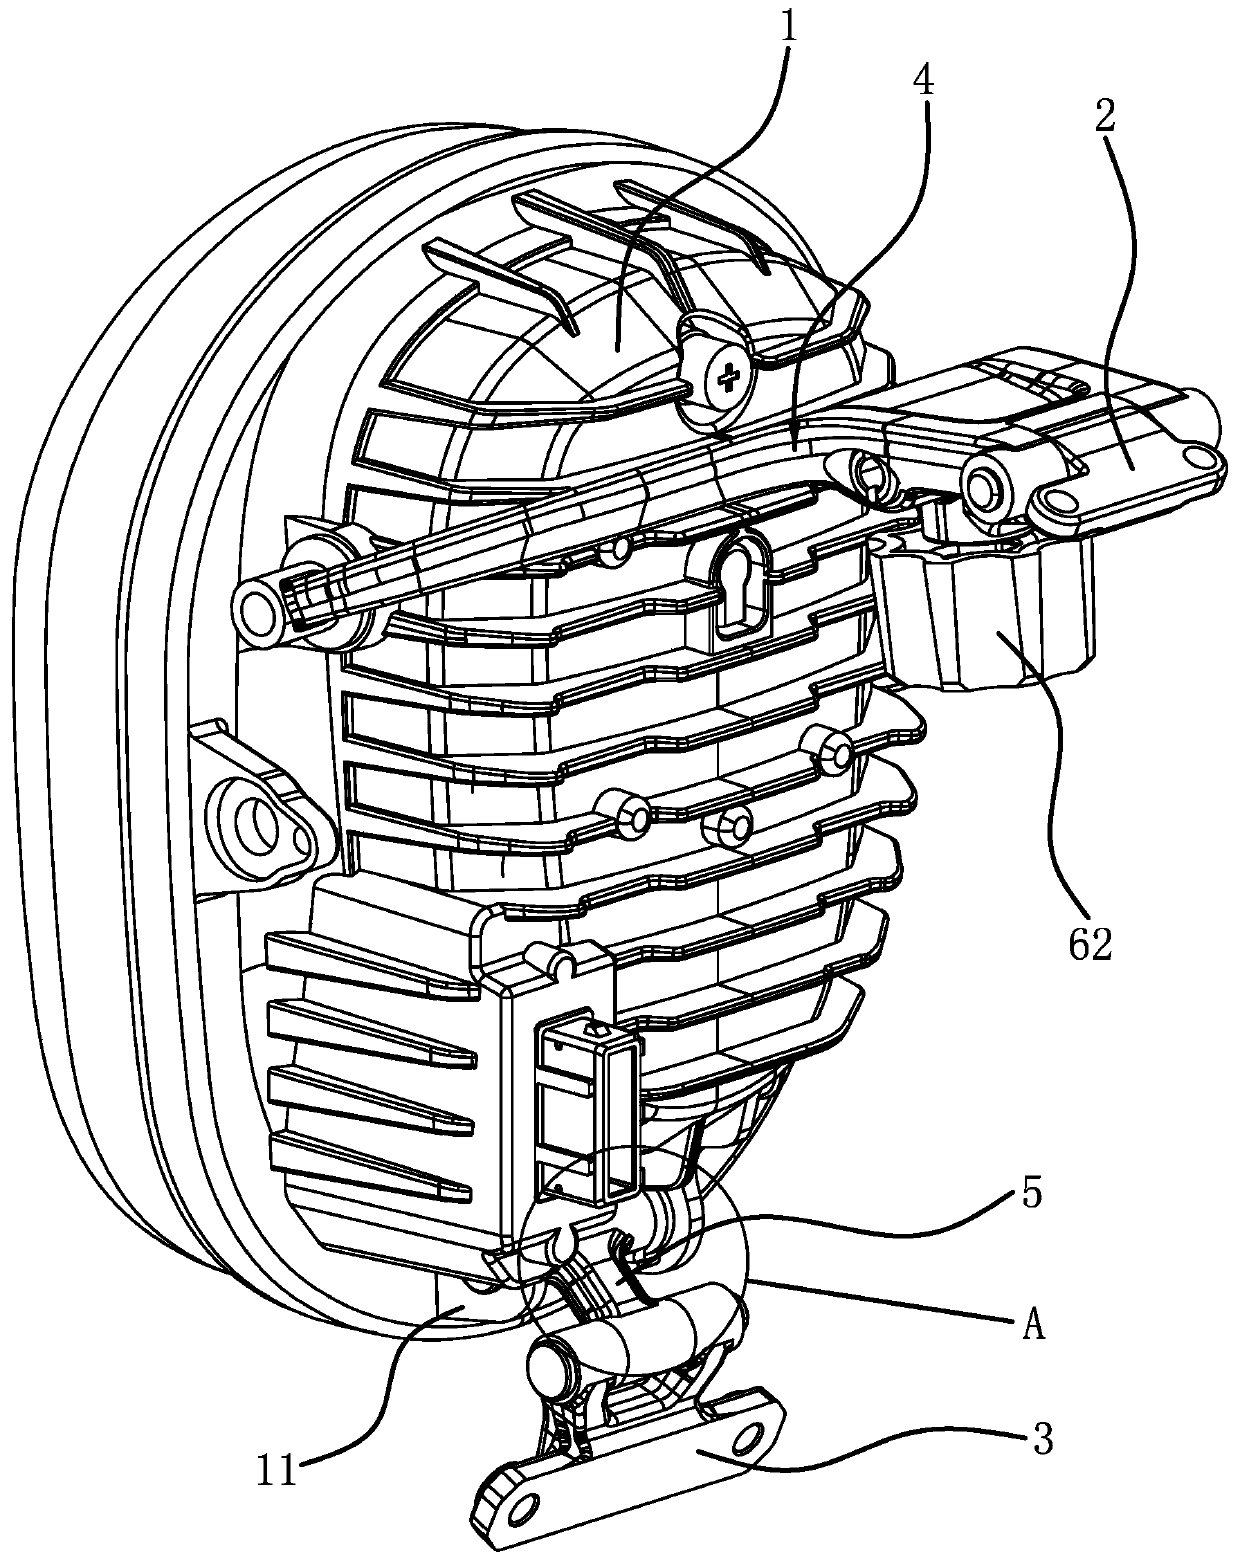 Motorcycle headlamp structure